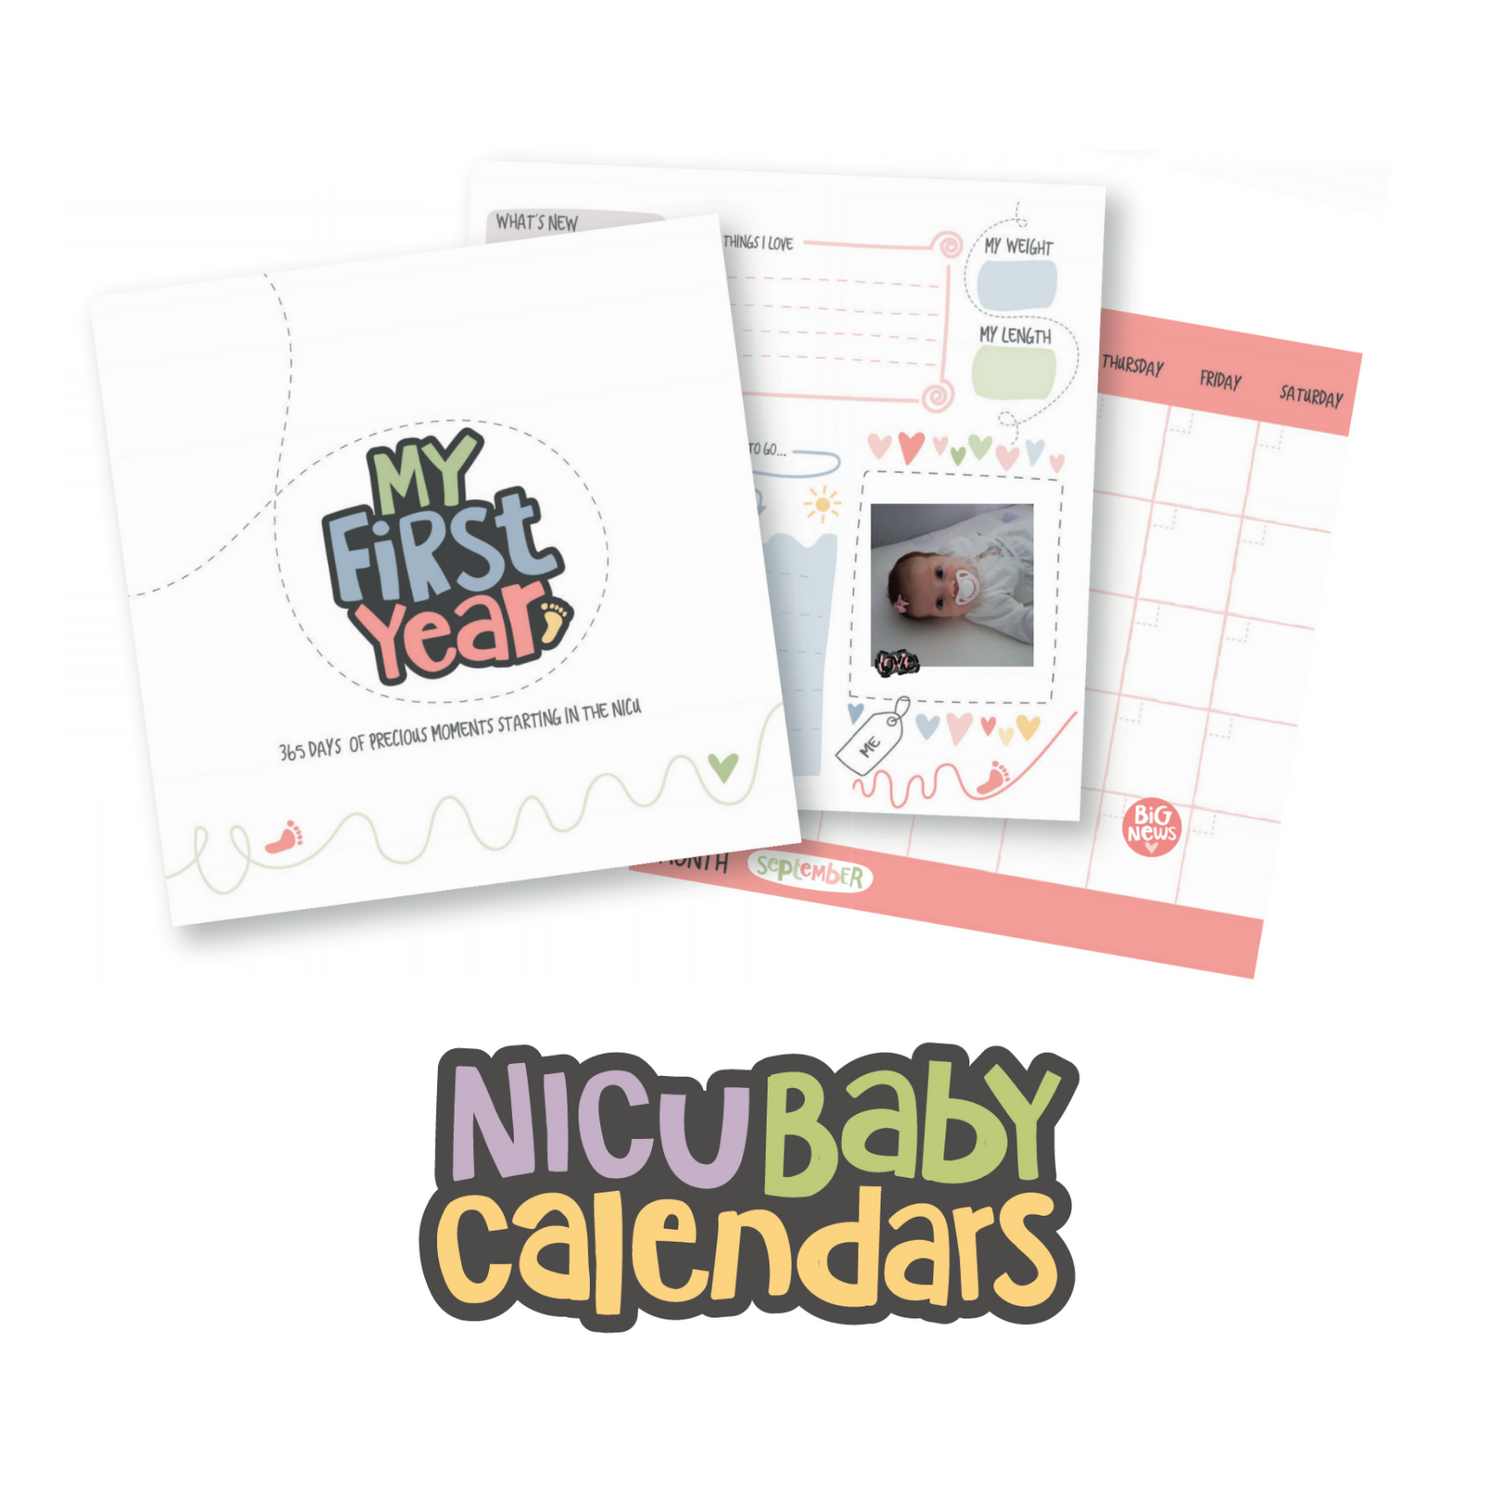 NICU Baby Calendars for first year. My First Year NICU Calendar baby calendar for 365 days of precious memories starting in the NICU to document baby's daily activities for the full first year with over 200 milestone stickers